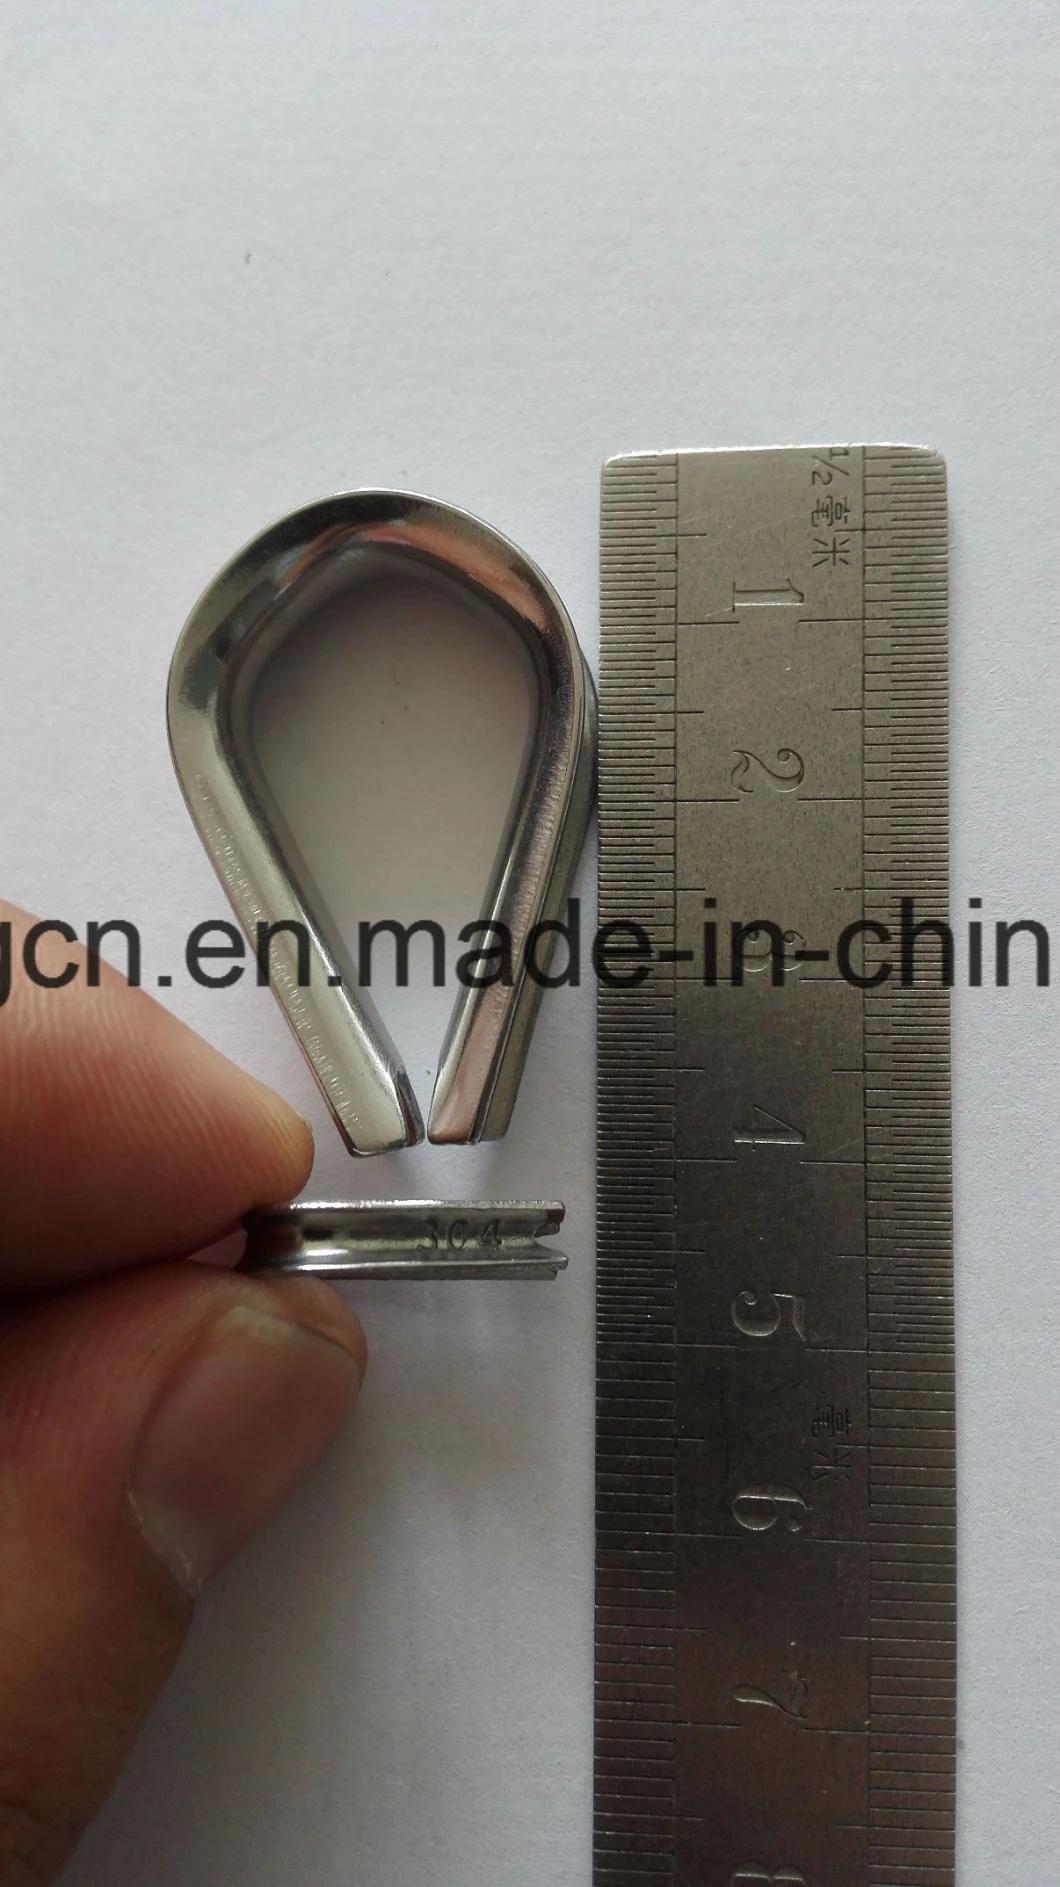 Stainless Steel European Standerd Wire Rope Thimble